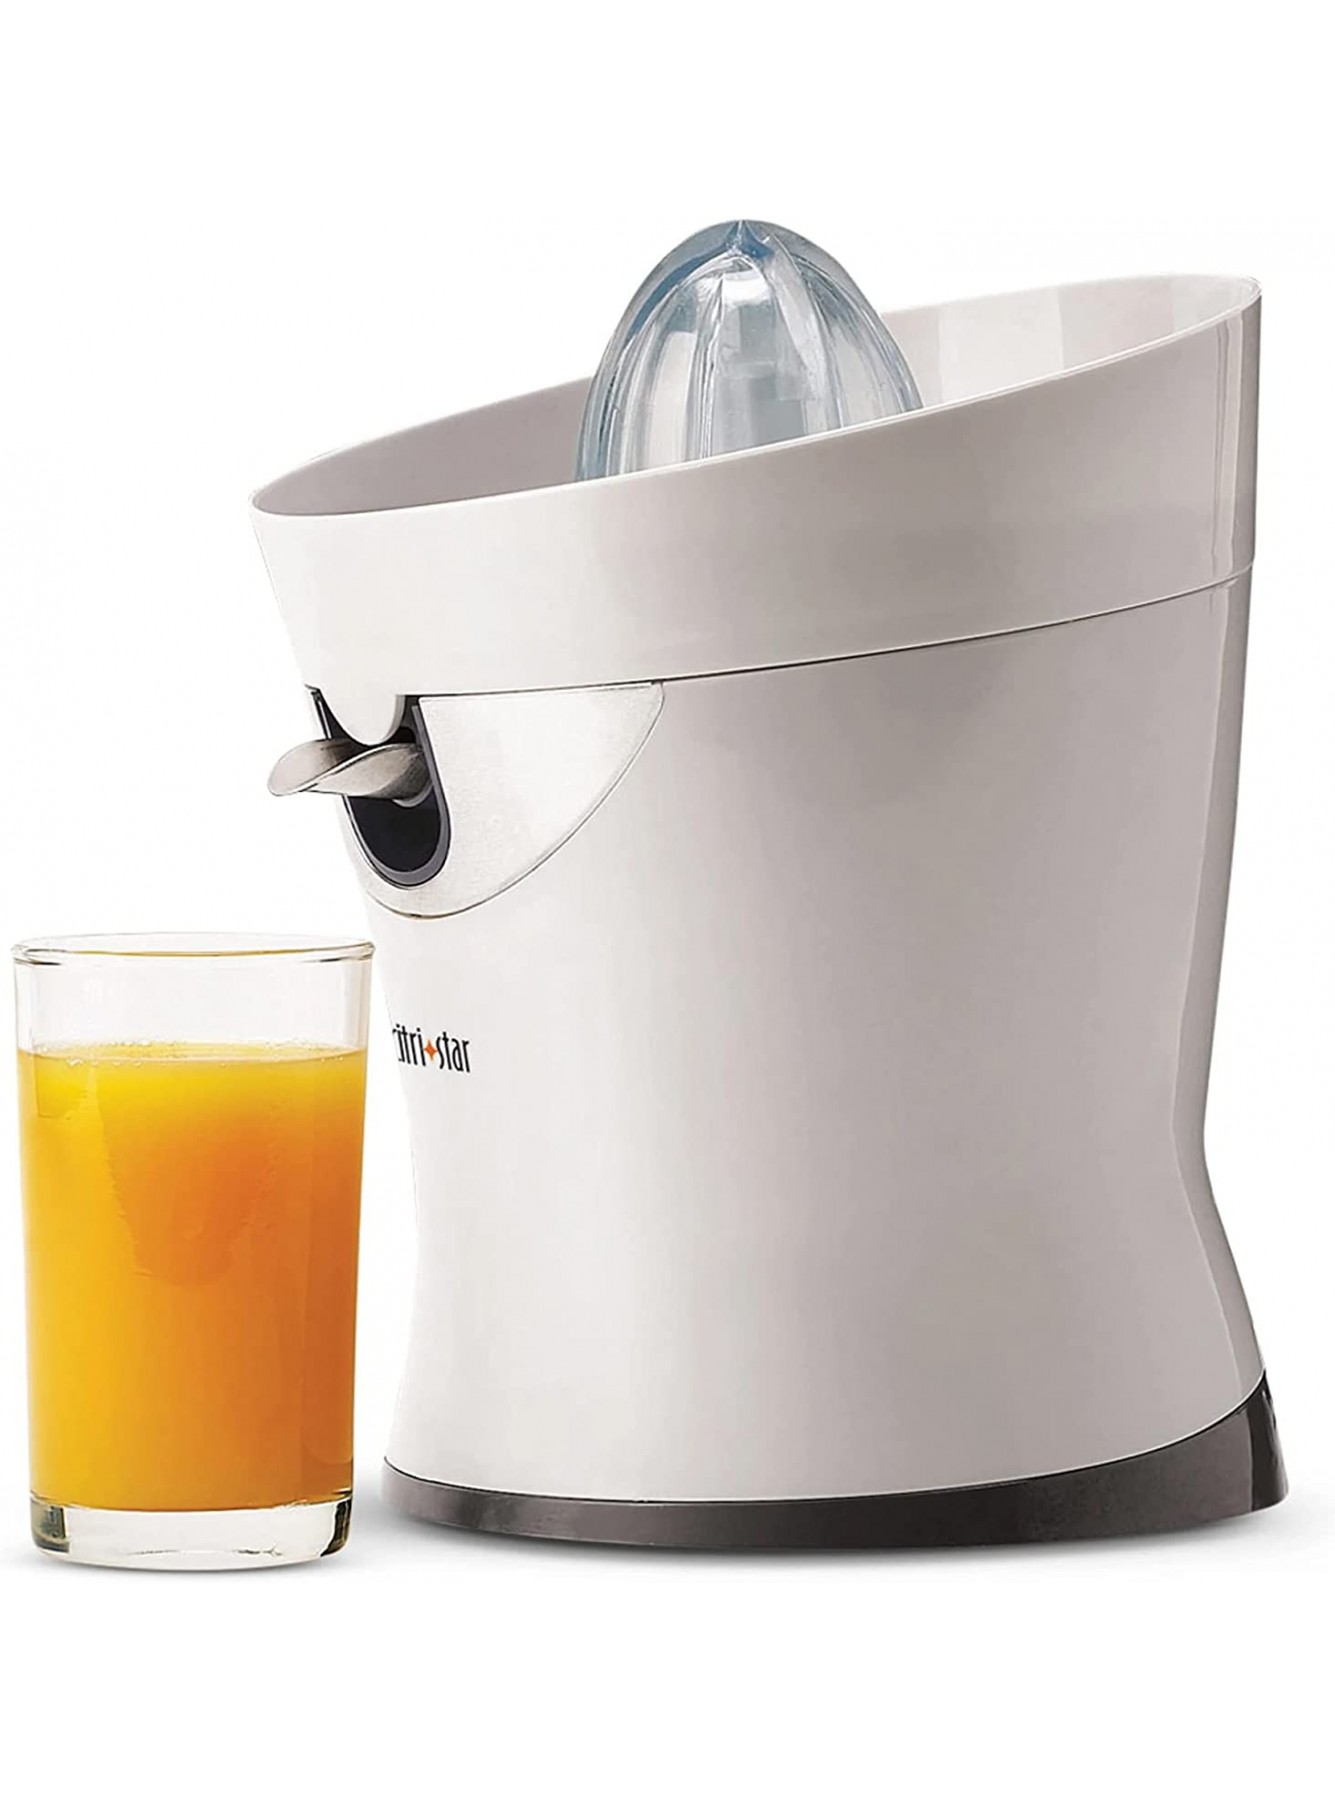 Tribest CitriStar CS-1000 Citrus Juicer Electric Juicer for Oranges and Lemons with Stainless Steel Strainer and Spout B001DZ6TH4